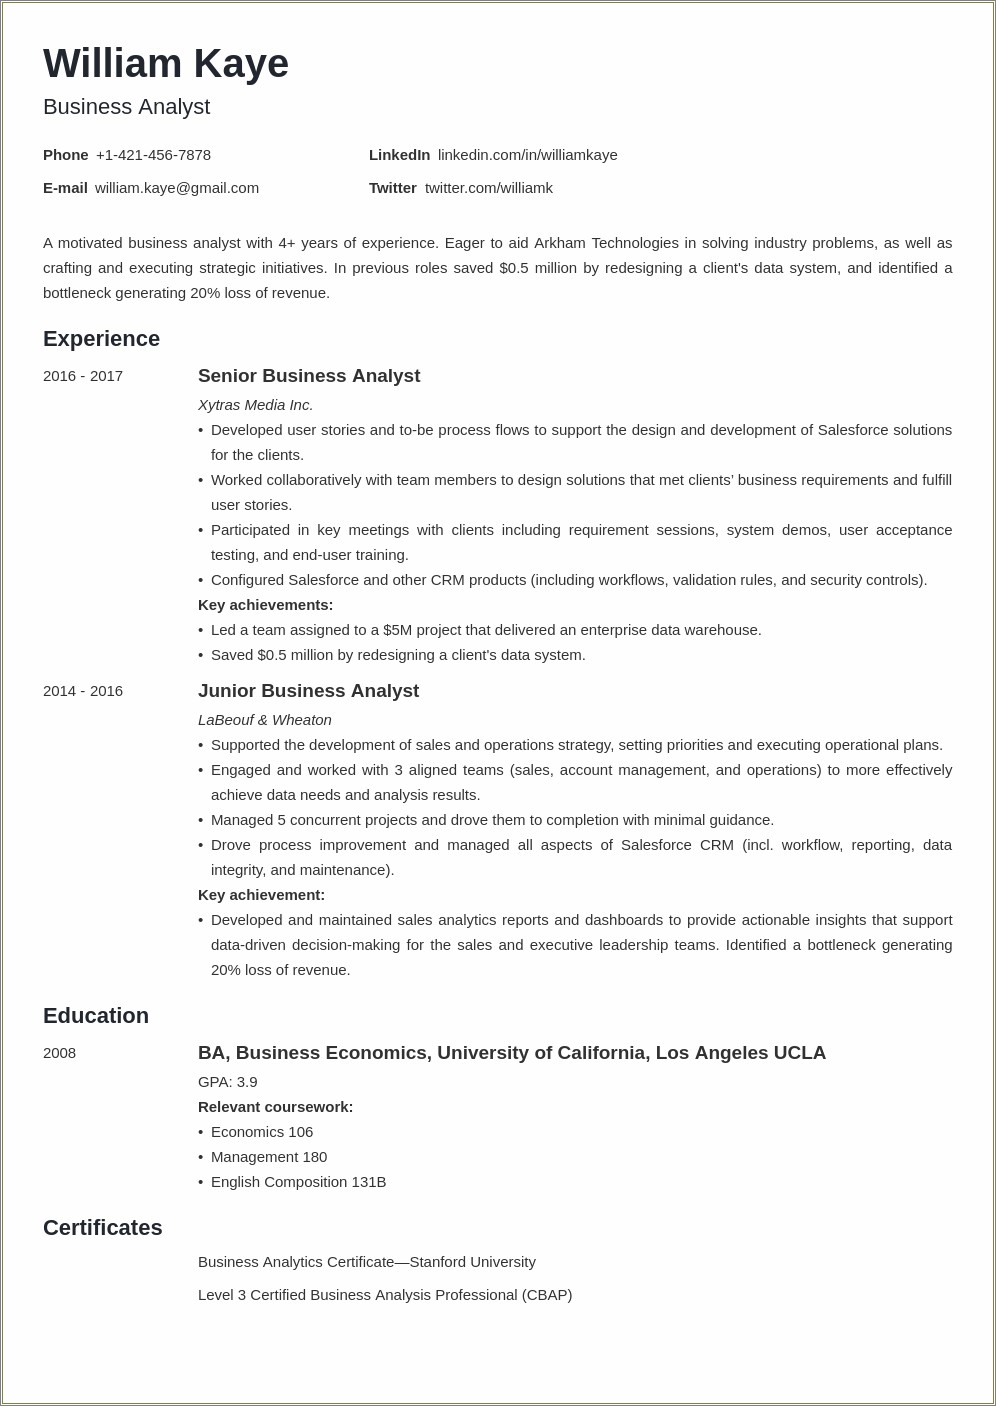 2 Years Experience Business Analyst Resume